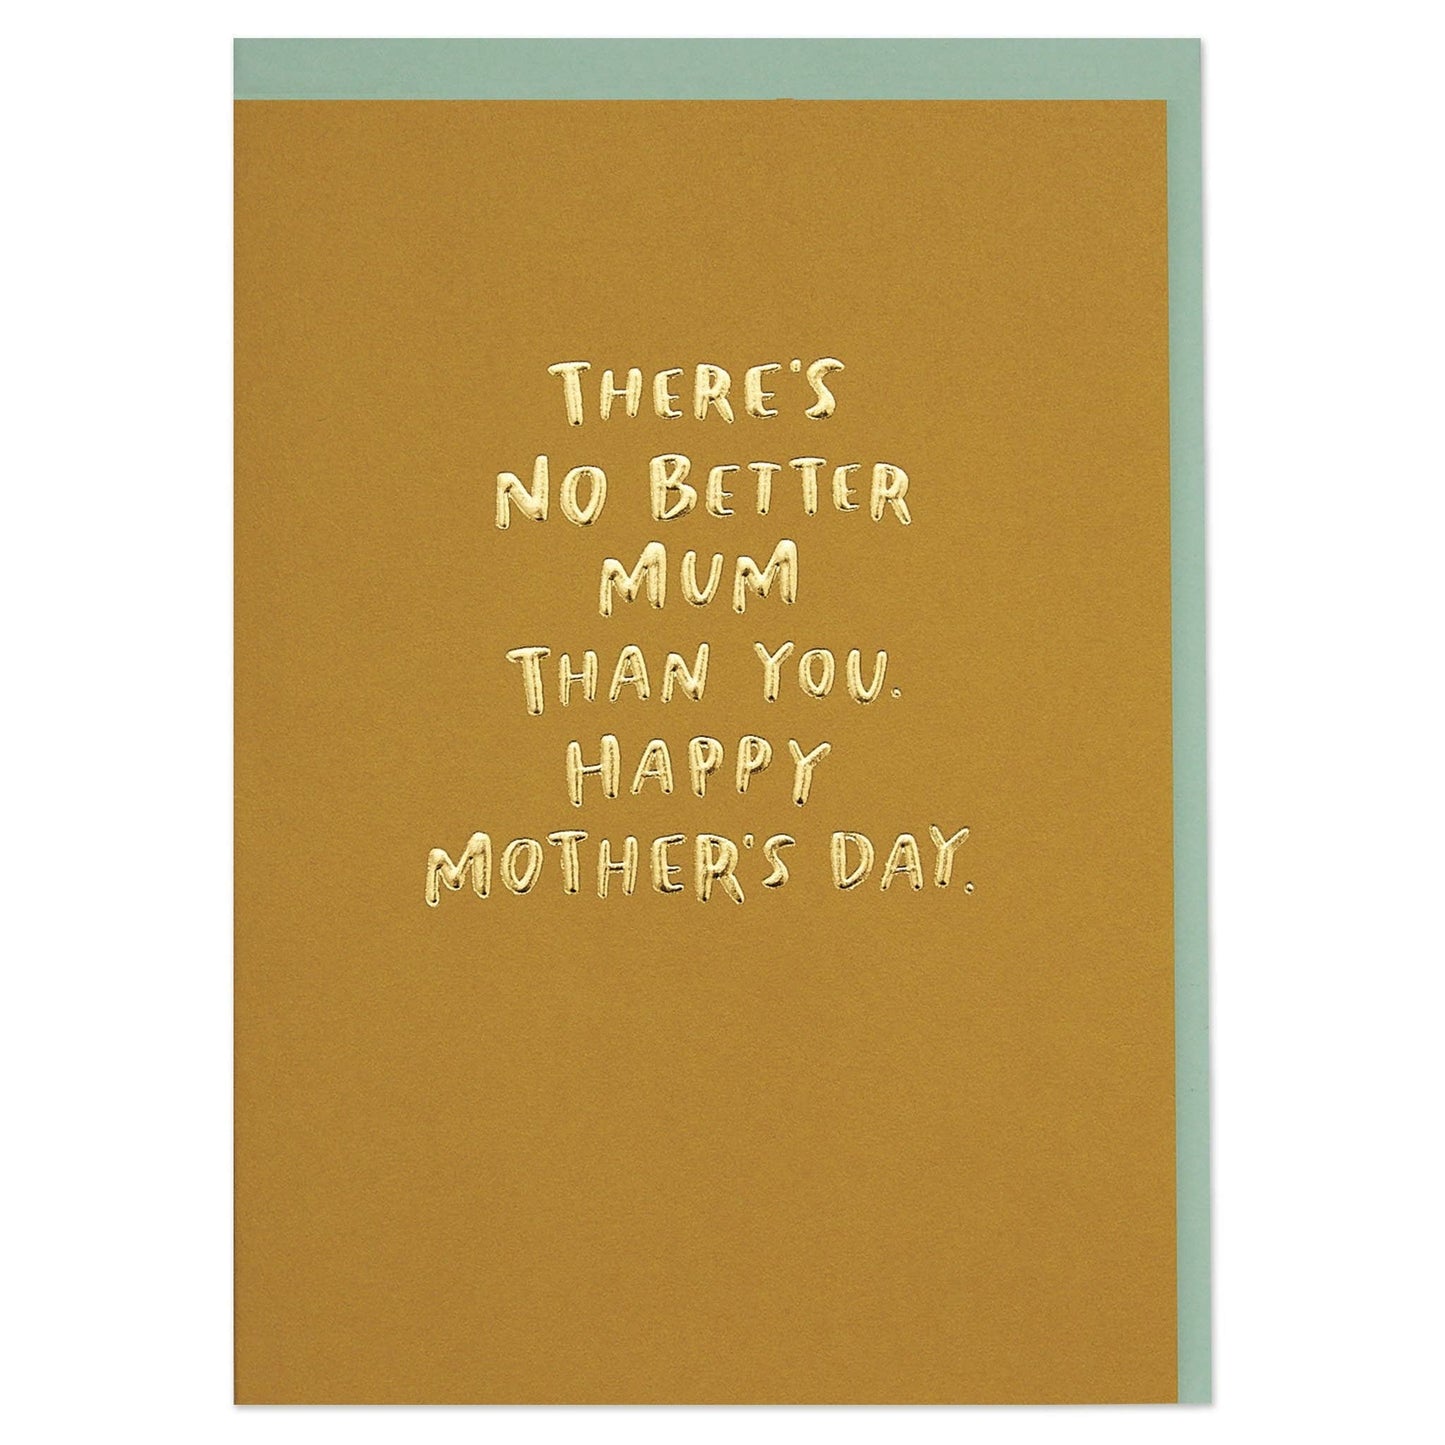 There's No Better Mum Mother's Day Card